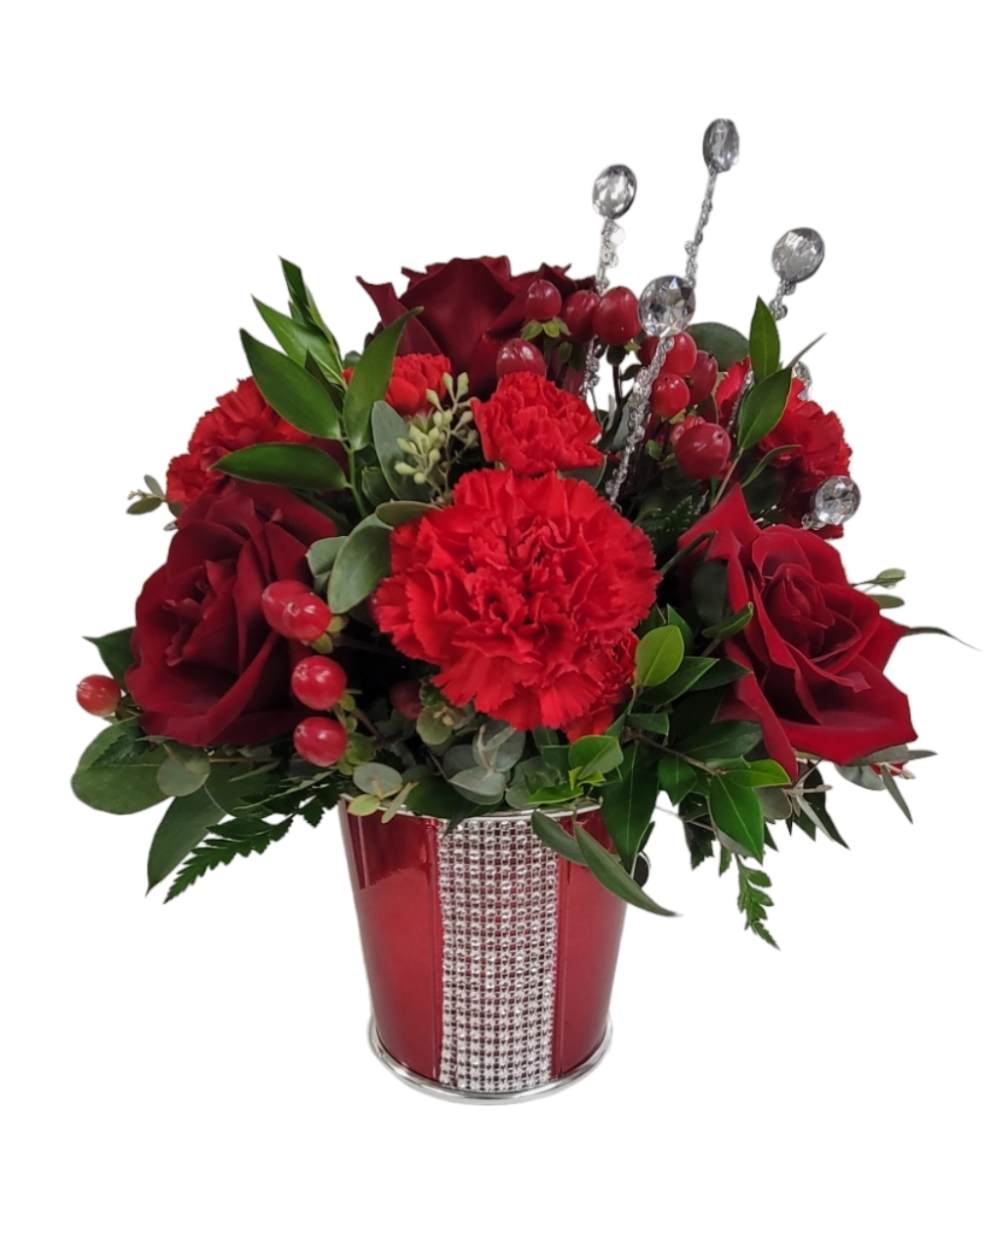 An all red arrangement consisting of roses, carnations, minicarnations and hypericum berries.